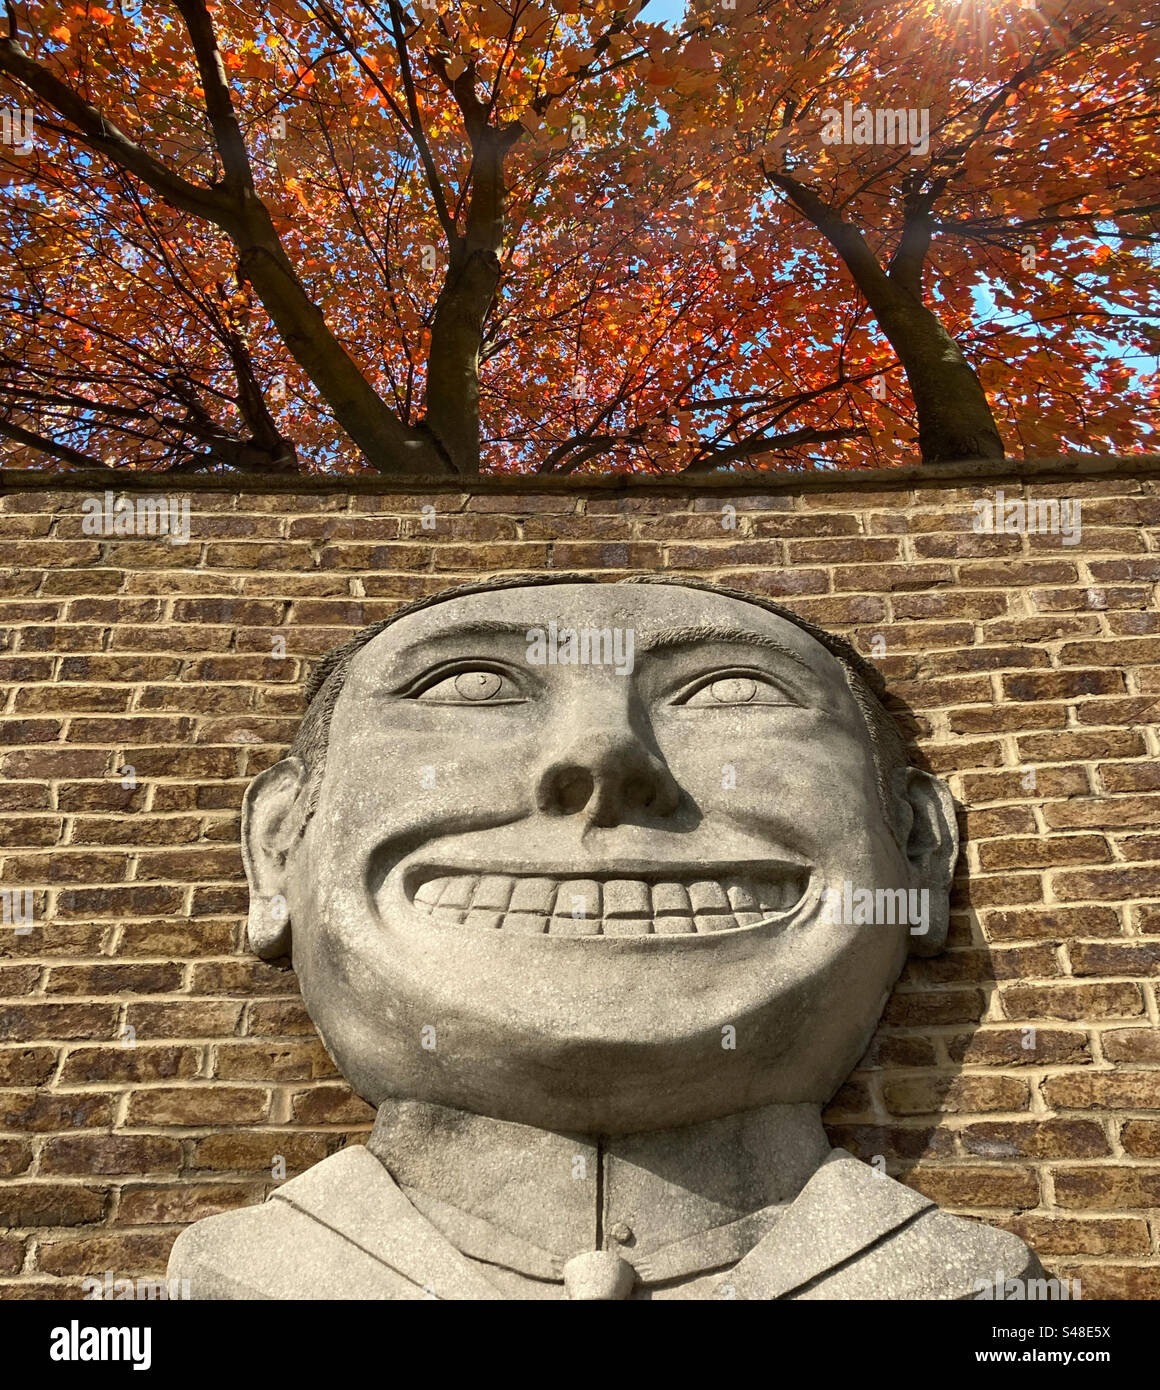 Relief sculpture of a grinning face on a brick wall with autumn trees branching overhead Stock Photo